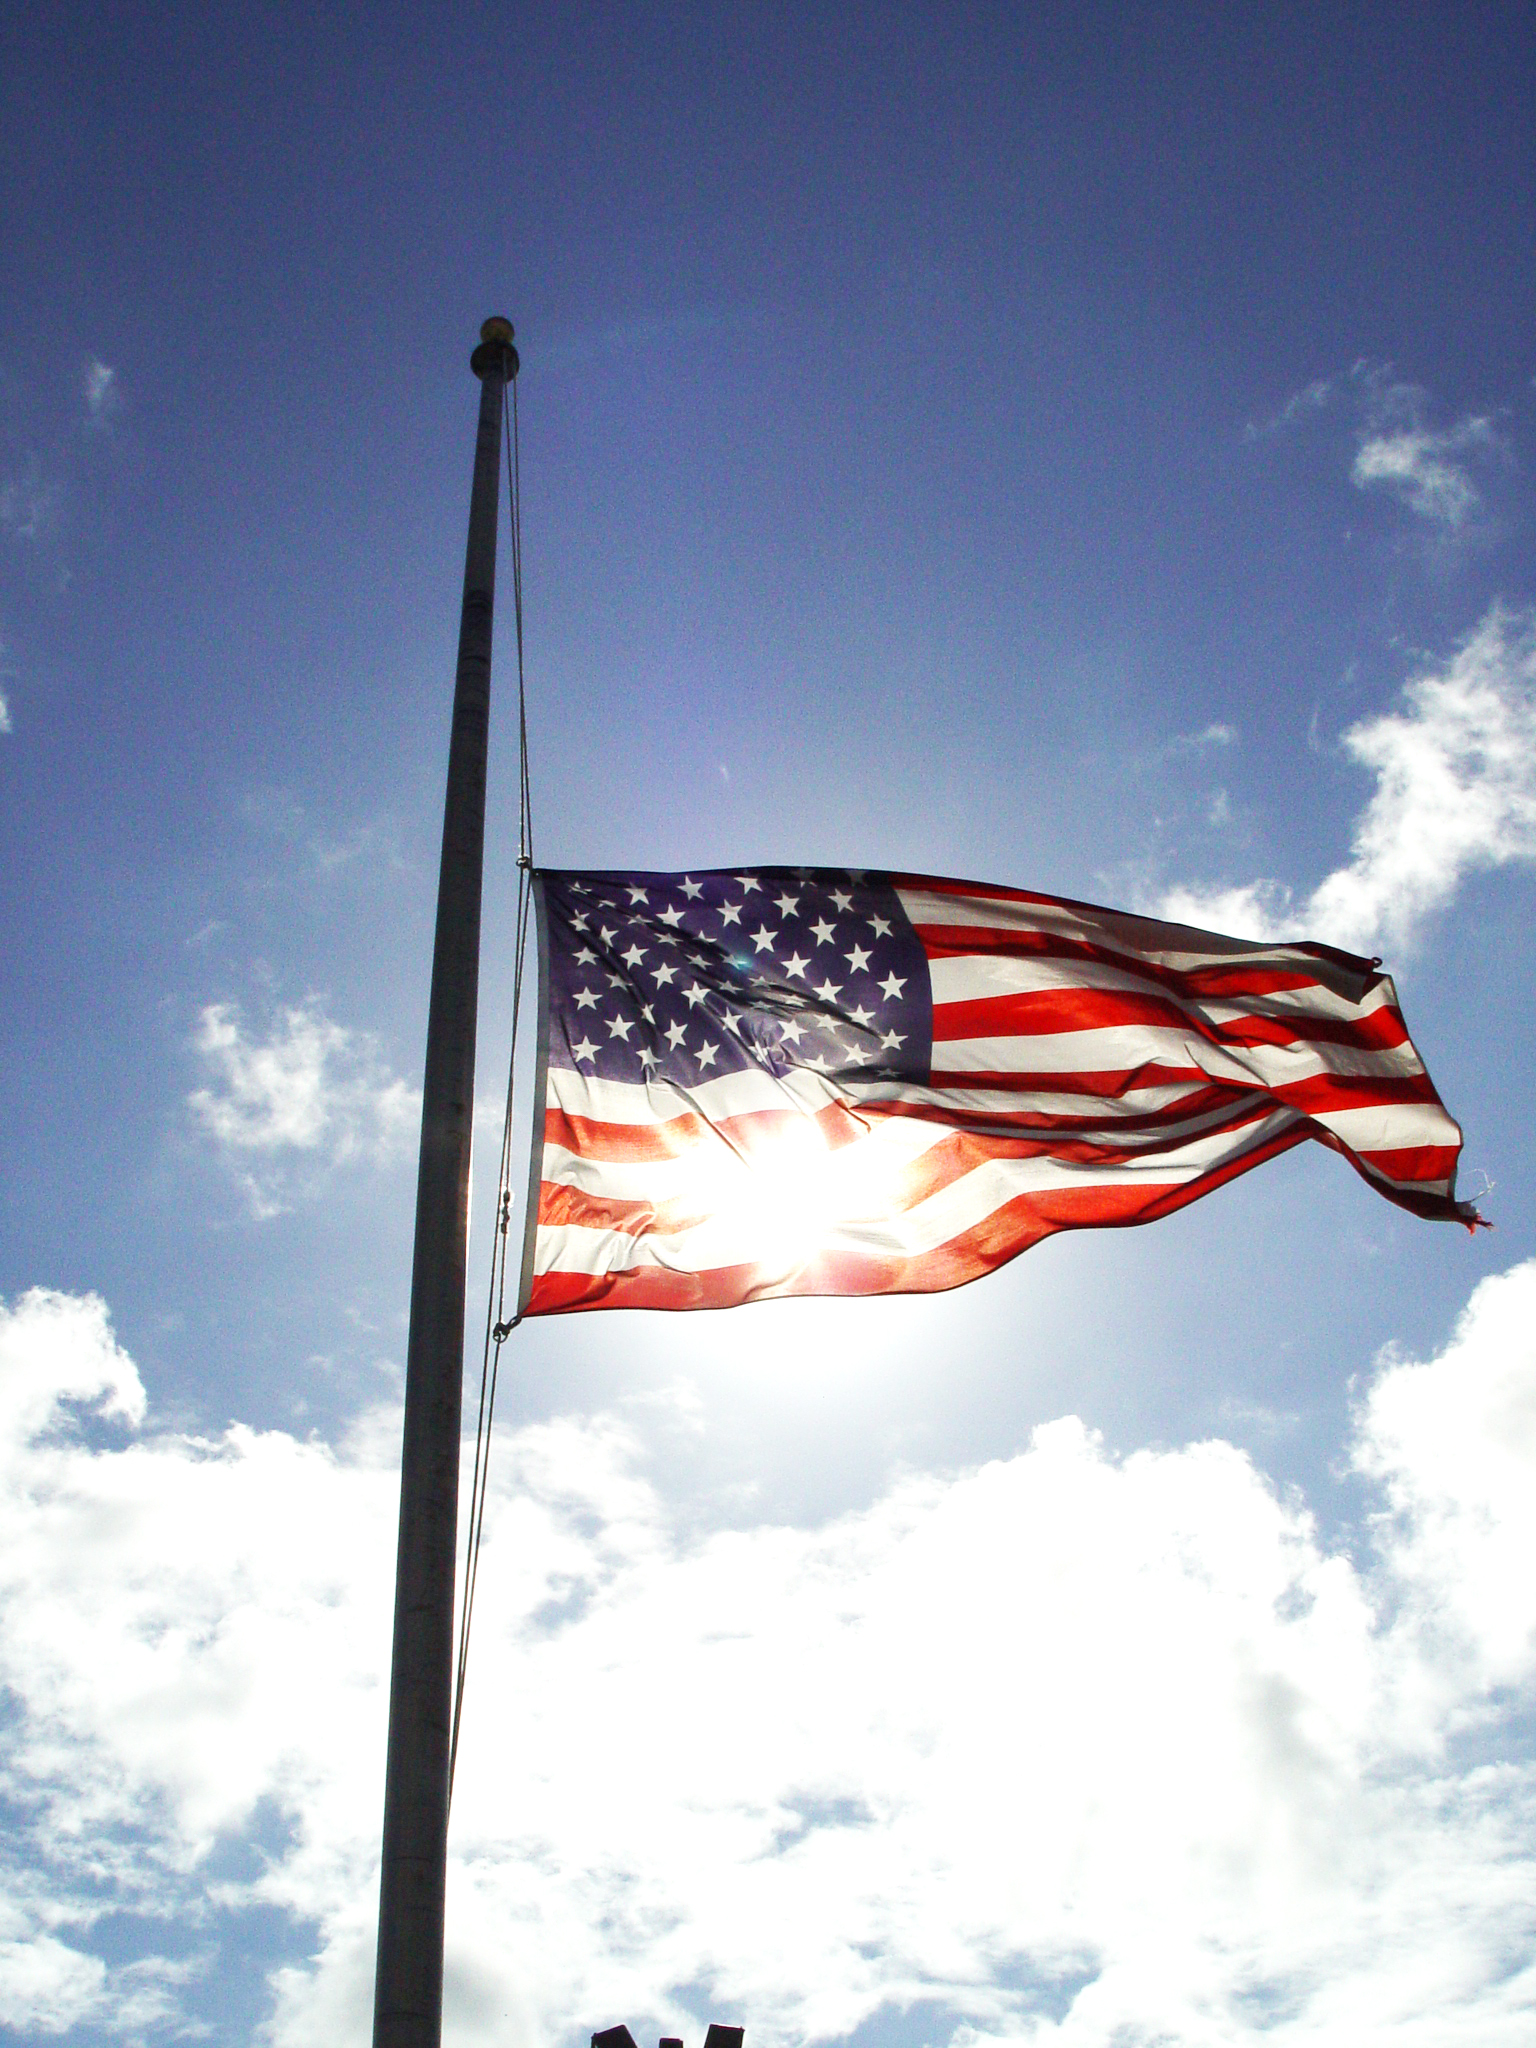 Flags at half staff today